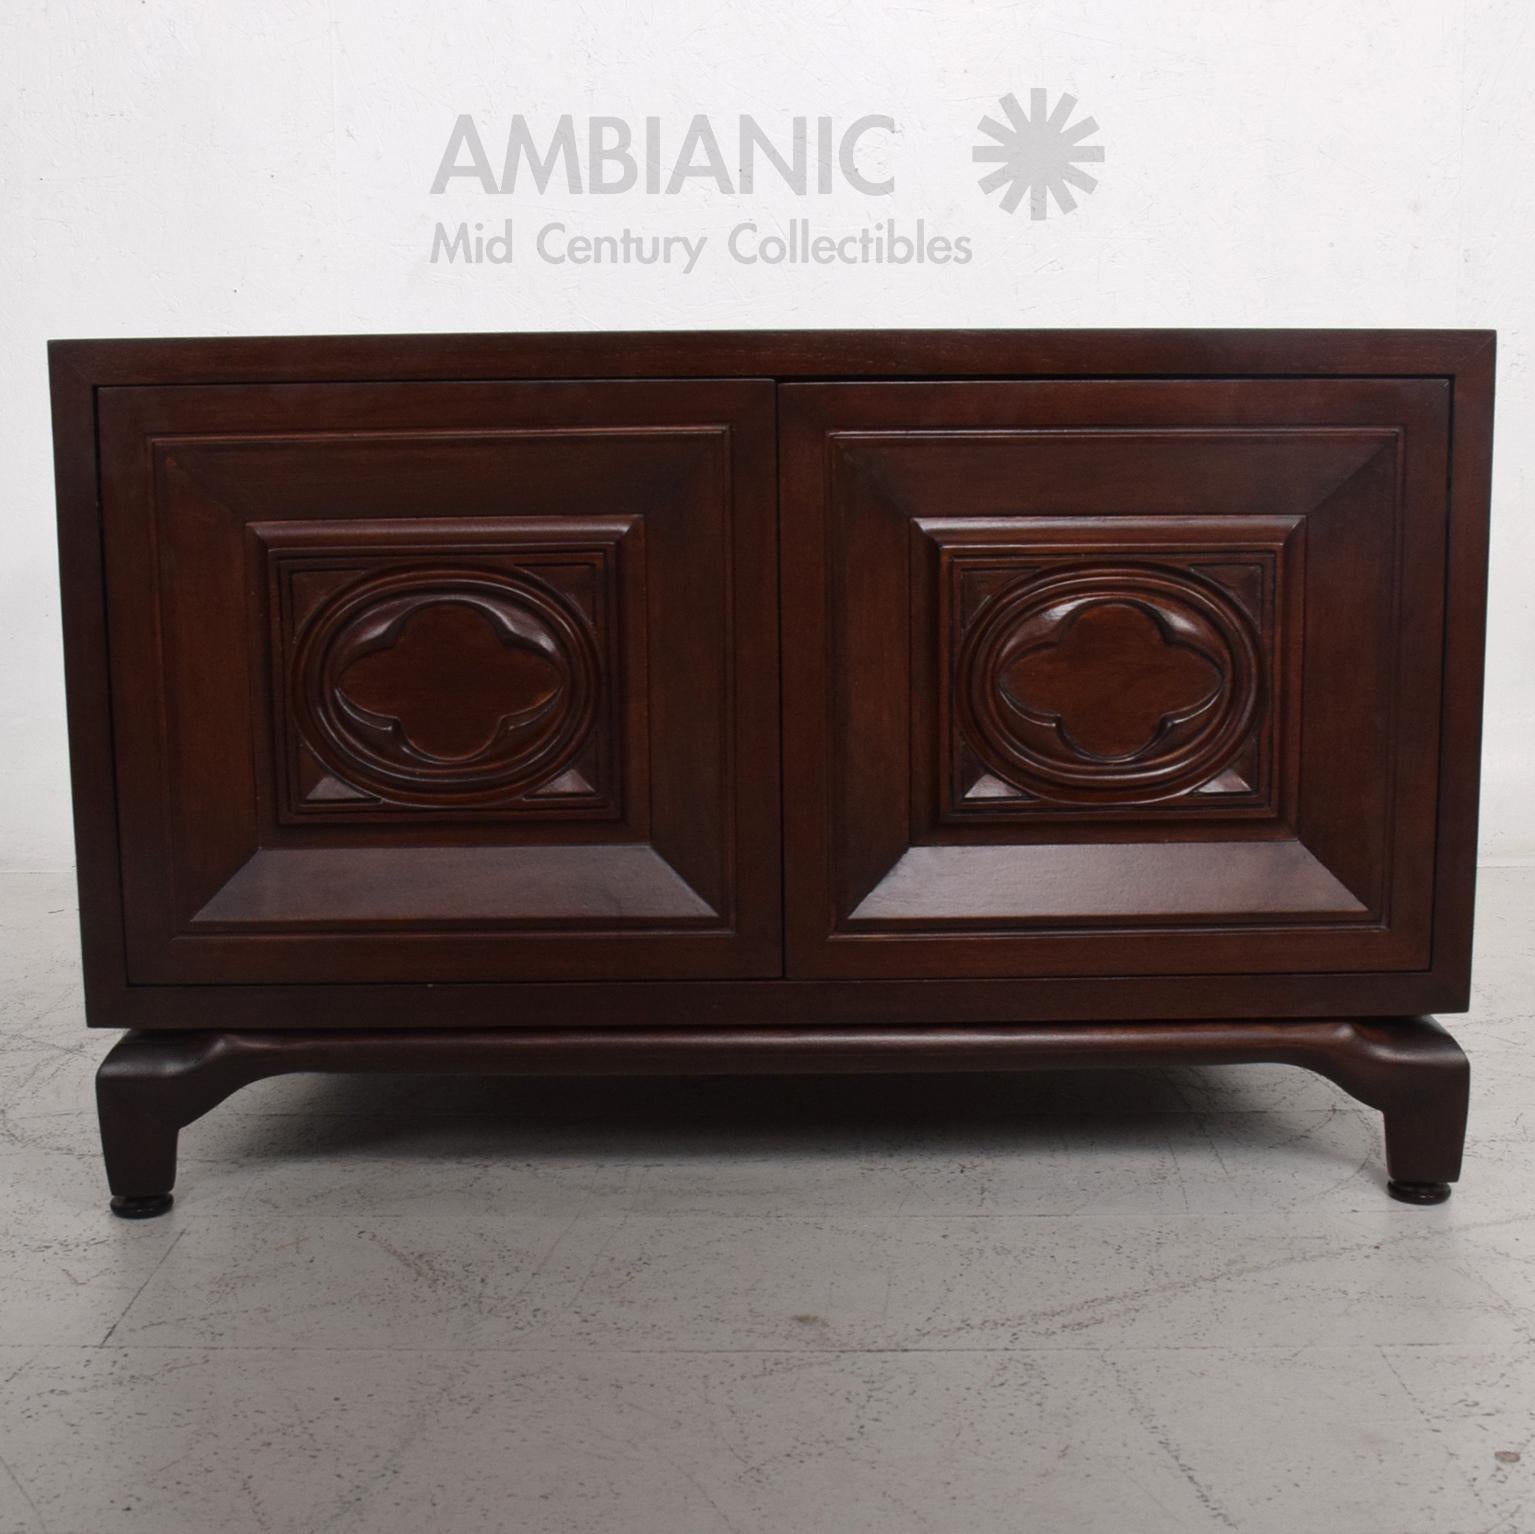 End Cabinets
1970s Monteverdi-Young carved mahogany cabinets side tables  
Push in magnetic lock system at doors
Designed in walnut mahogany. 
Sculptural carved wood detail on front door face. Subtle scroll outline at top.
Unmarked attributed to